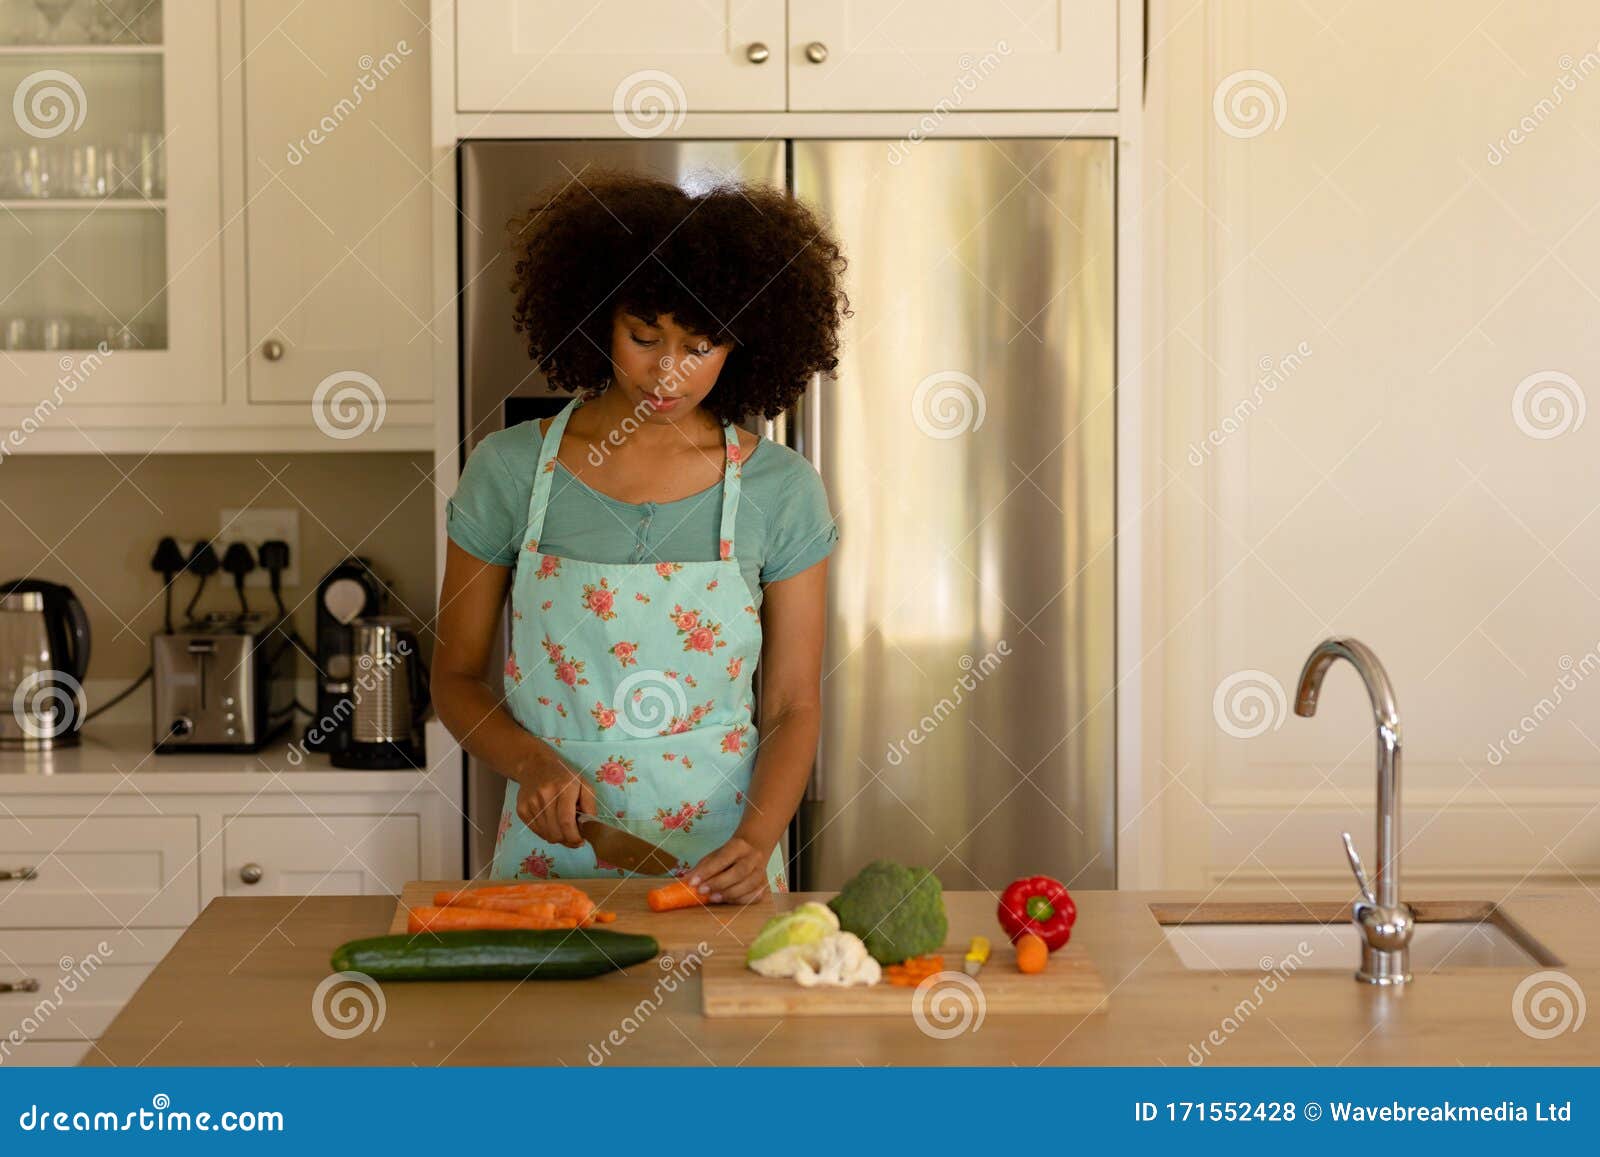 Young Woman Standing In Her Kitchen Wearing Apron Cooking 